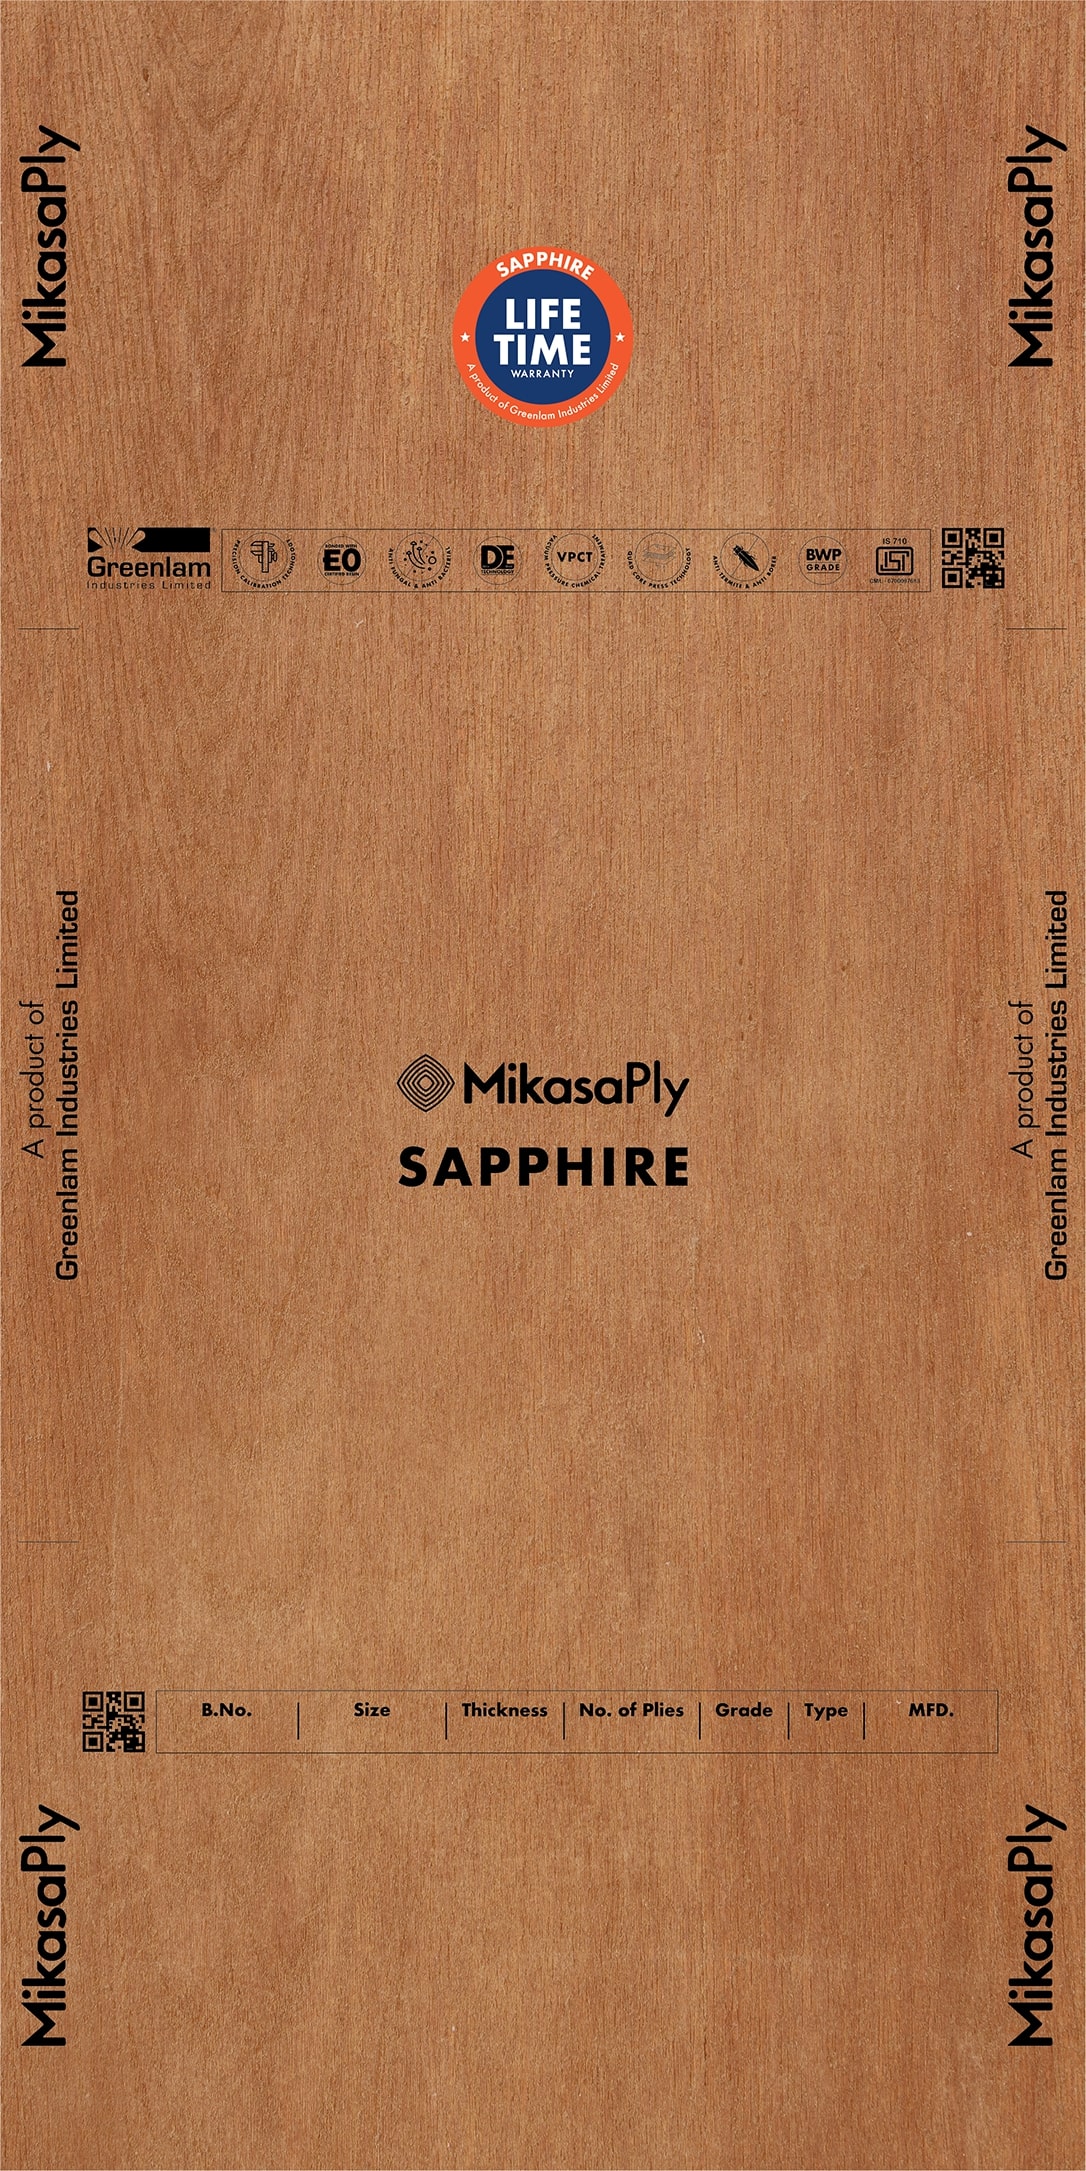 Sapphire Ply Board by MikasaPly